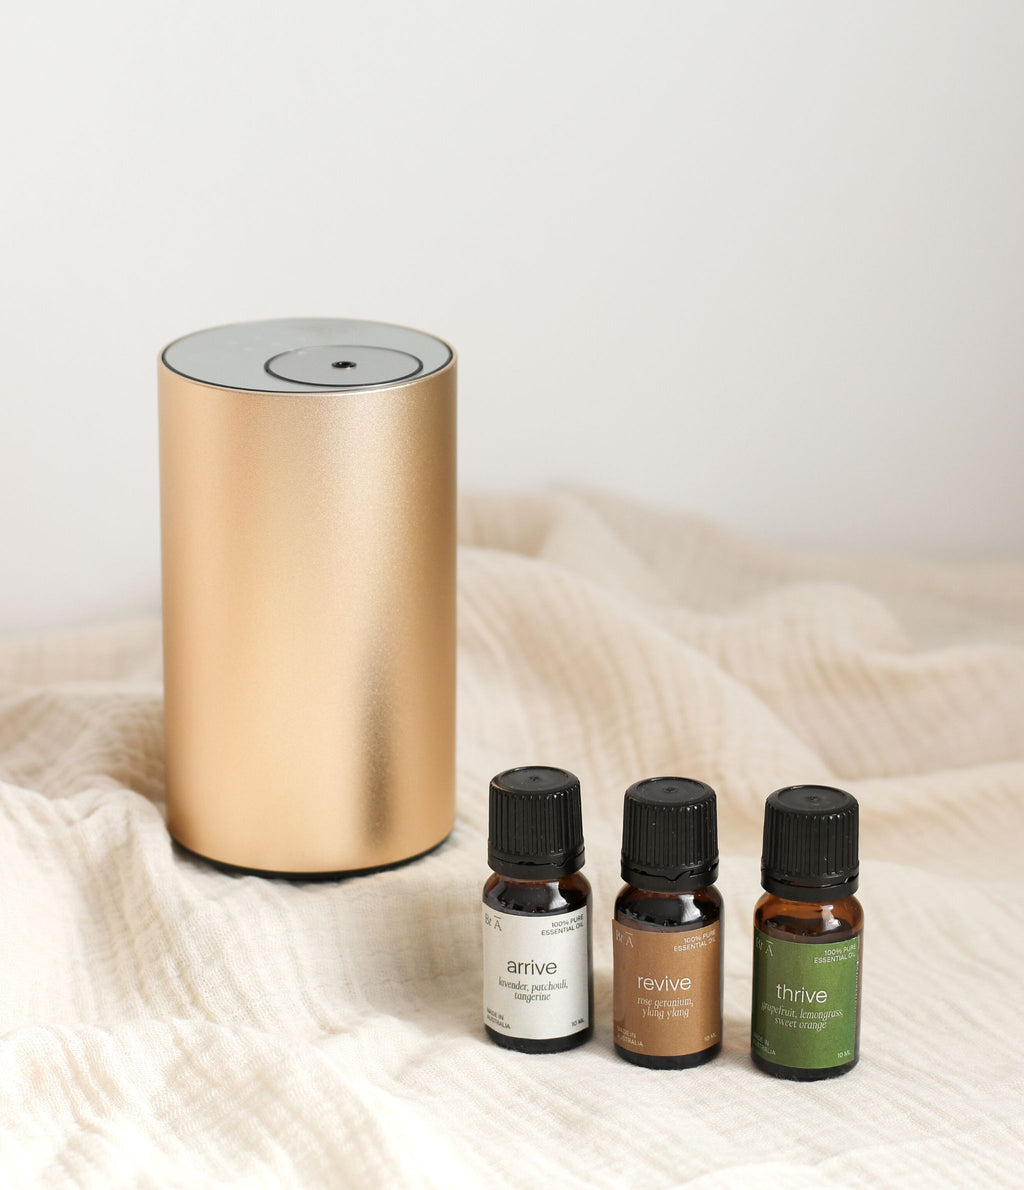 Ora diffuser gold and arrive essential oil collection